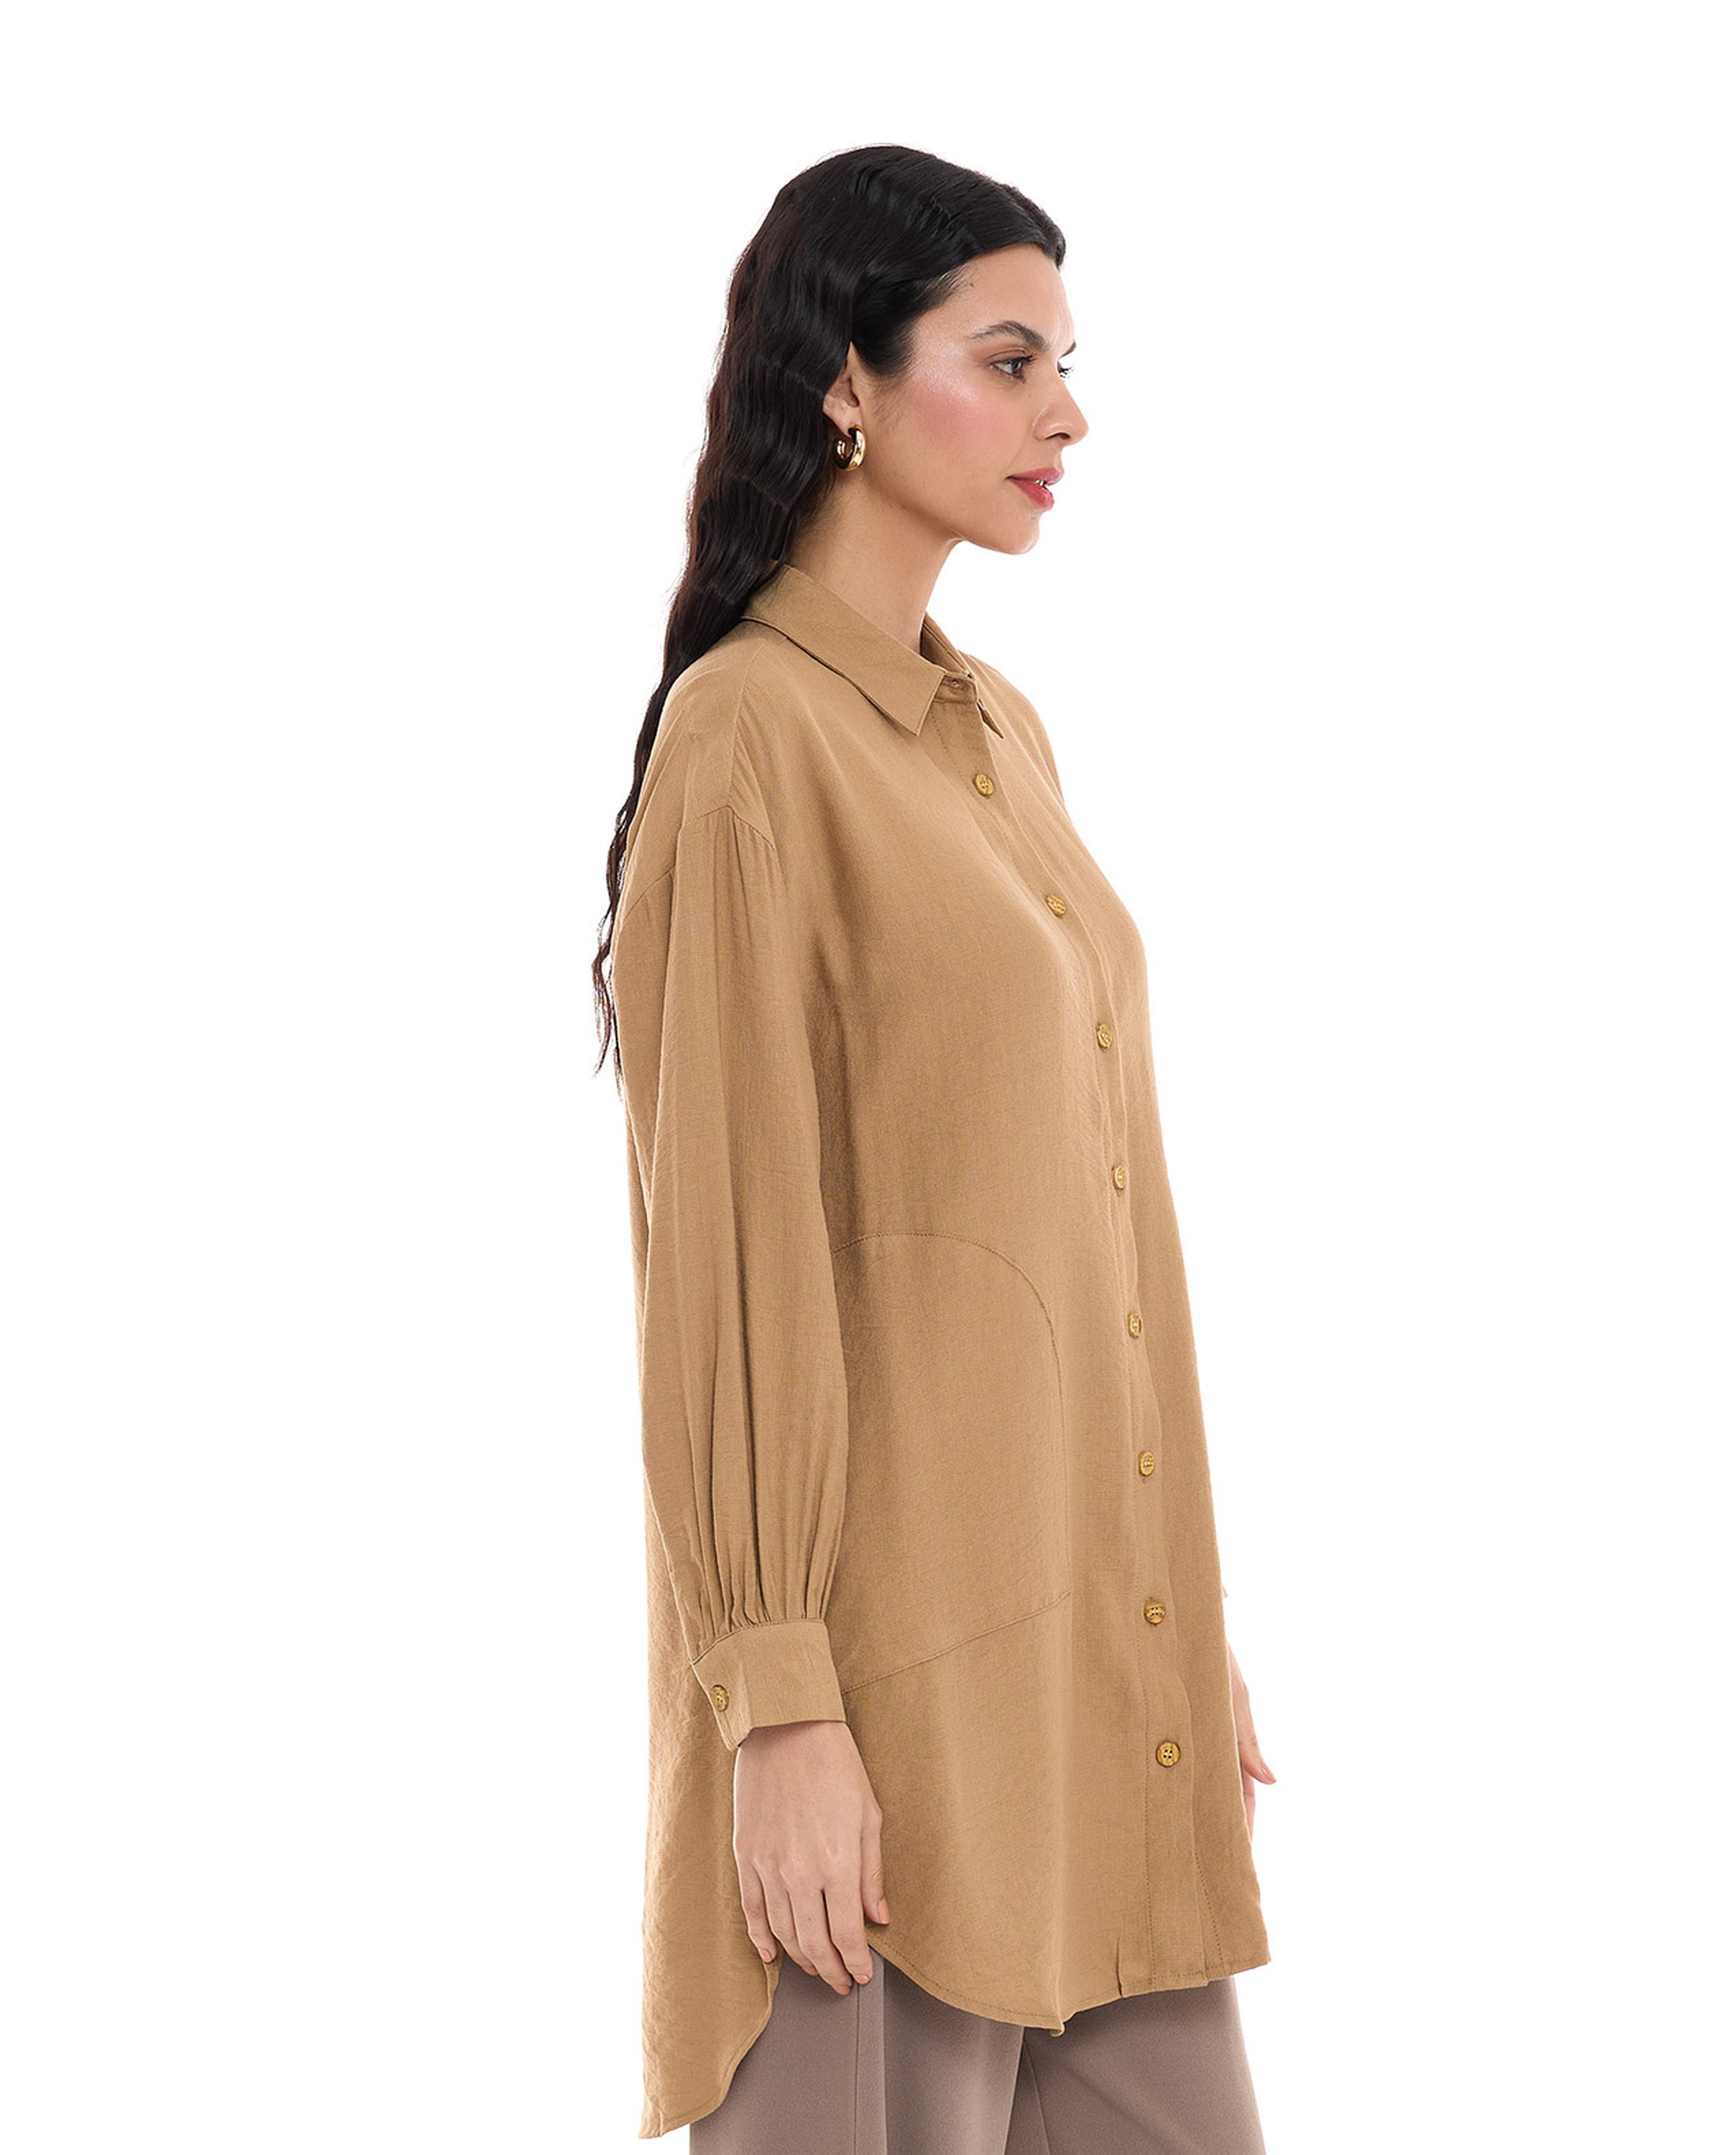 Solid Tunic with Classic Collar and Long Sleeves